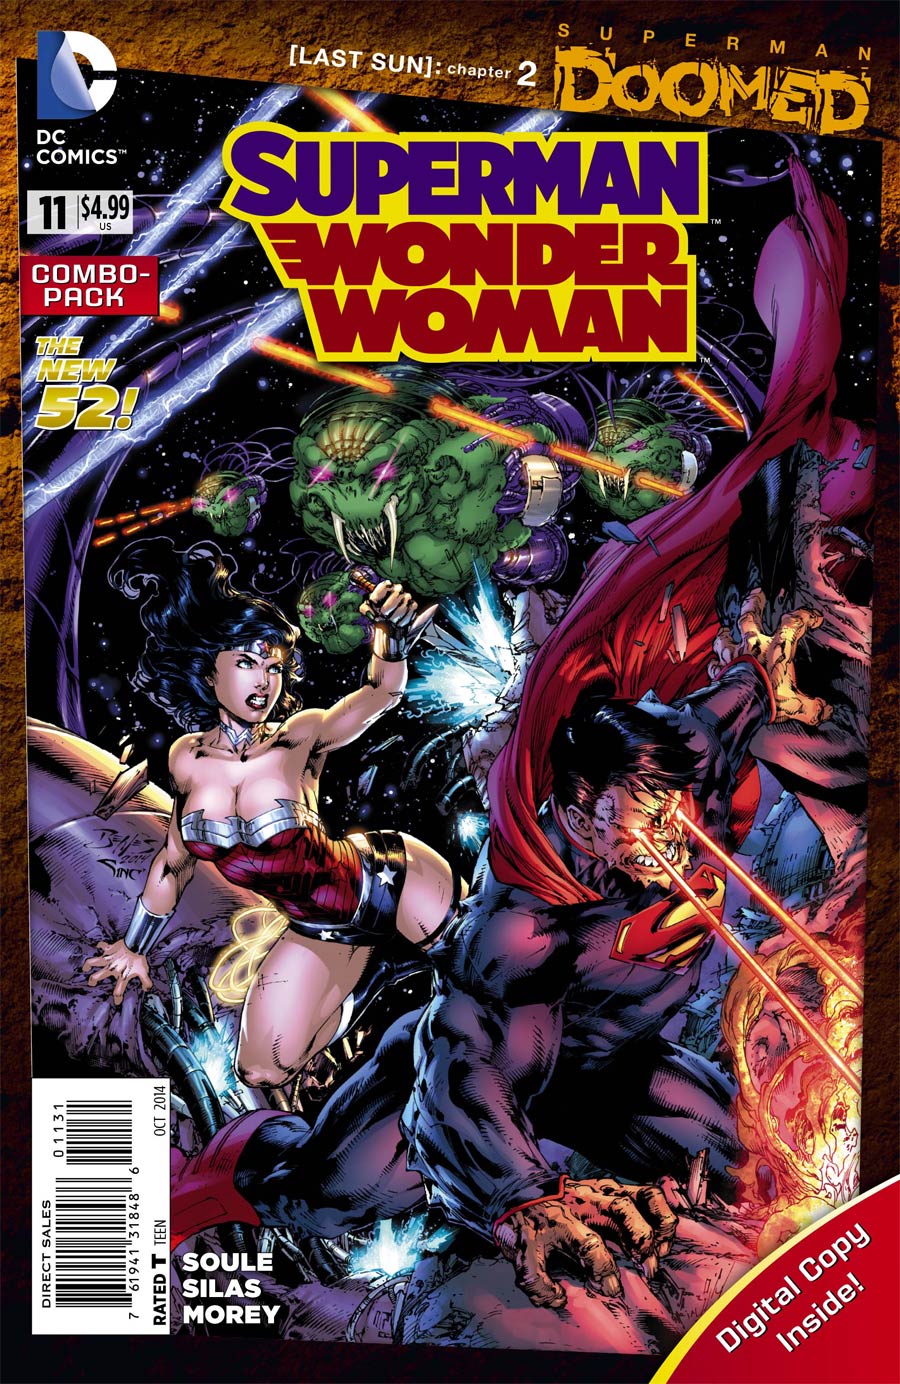 Superman Wonder Woman #11 Cover C Combo Pack With Polybag (Superman Doomed Tie-In)